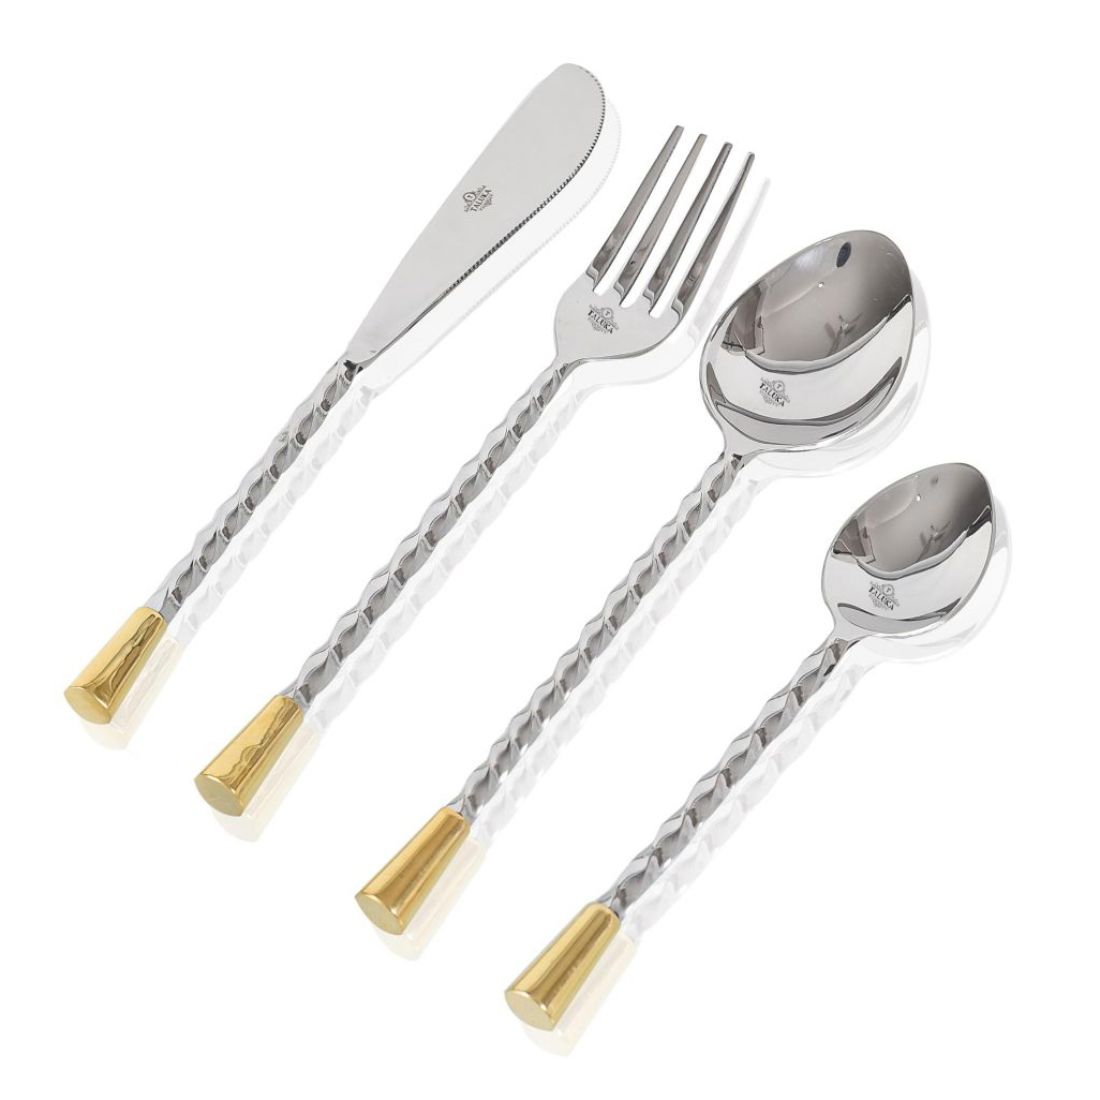 Premium Stainless Steel Mirror Finish 24 Pcs Tableware Cutlery Set use Hotel | Home | Restaurant (6 Knives, 6 Forks, 6 Dessert Spoons and 6 Child Spoons)